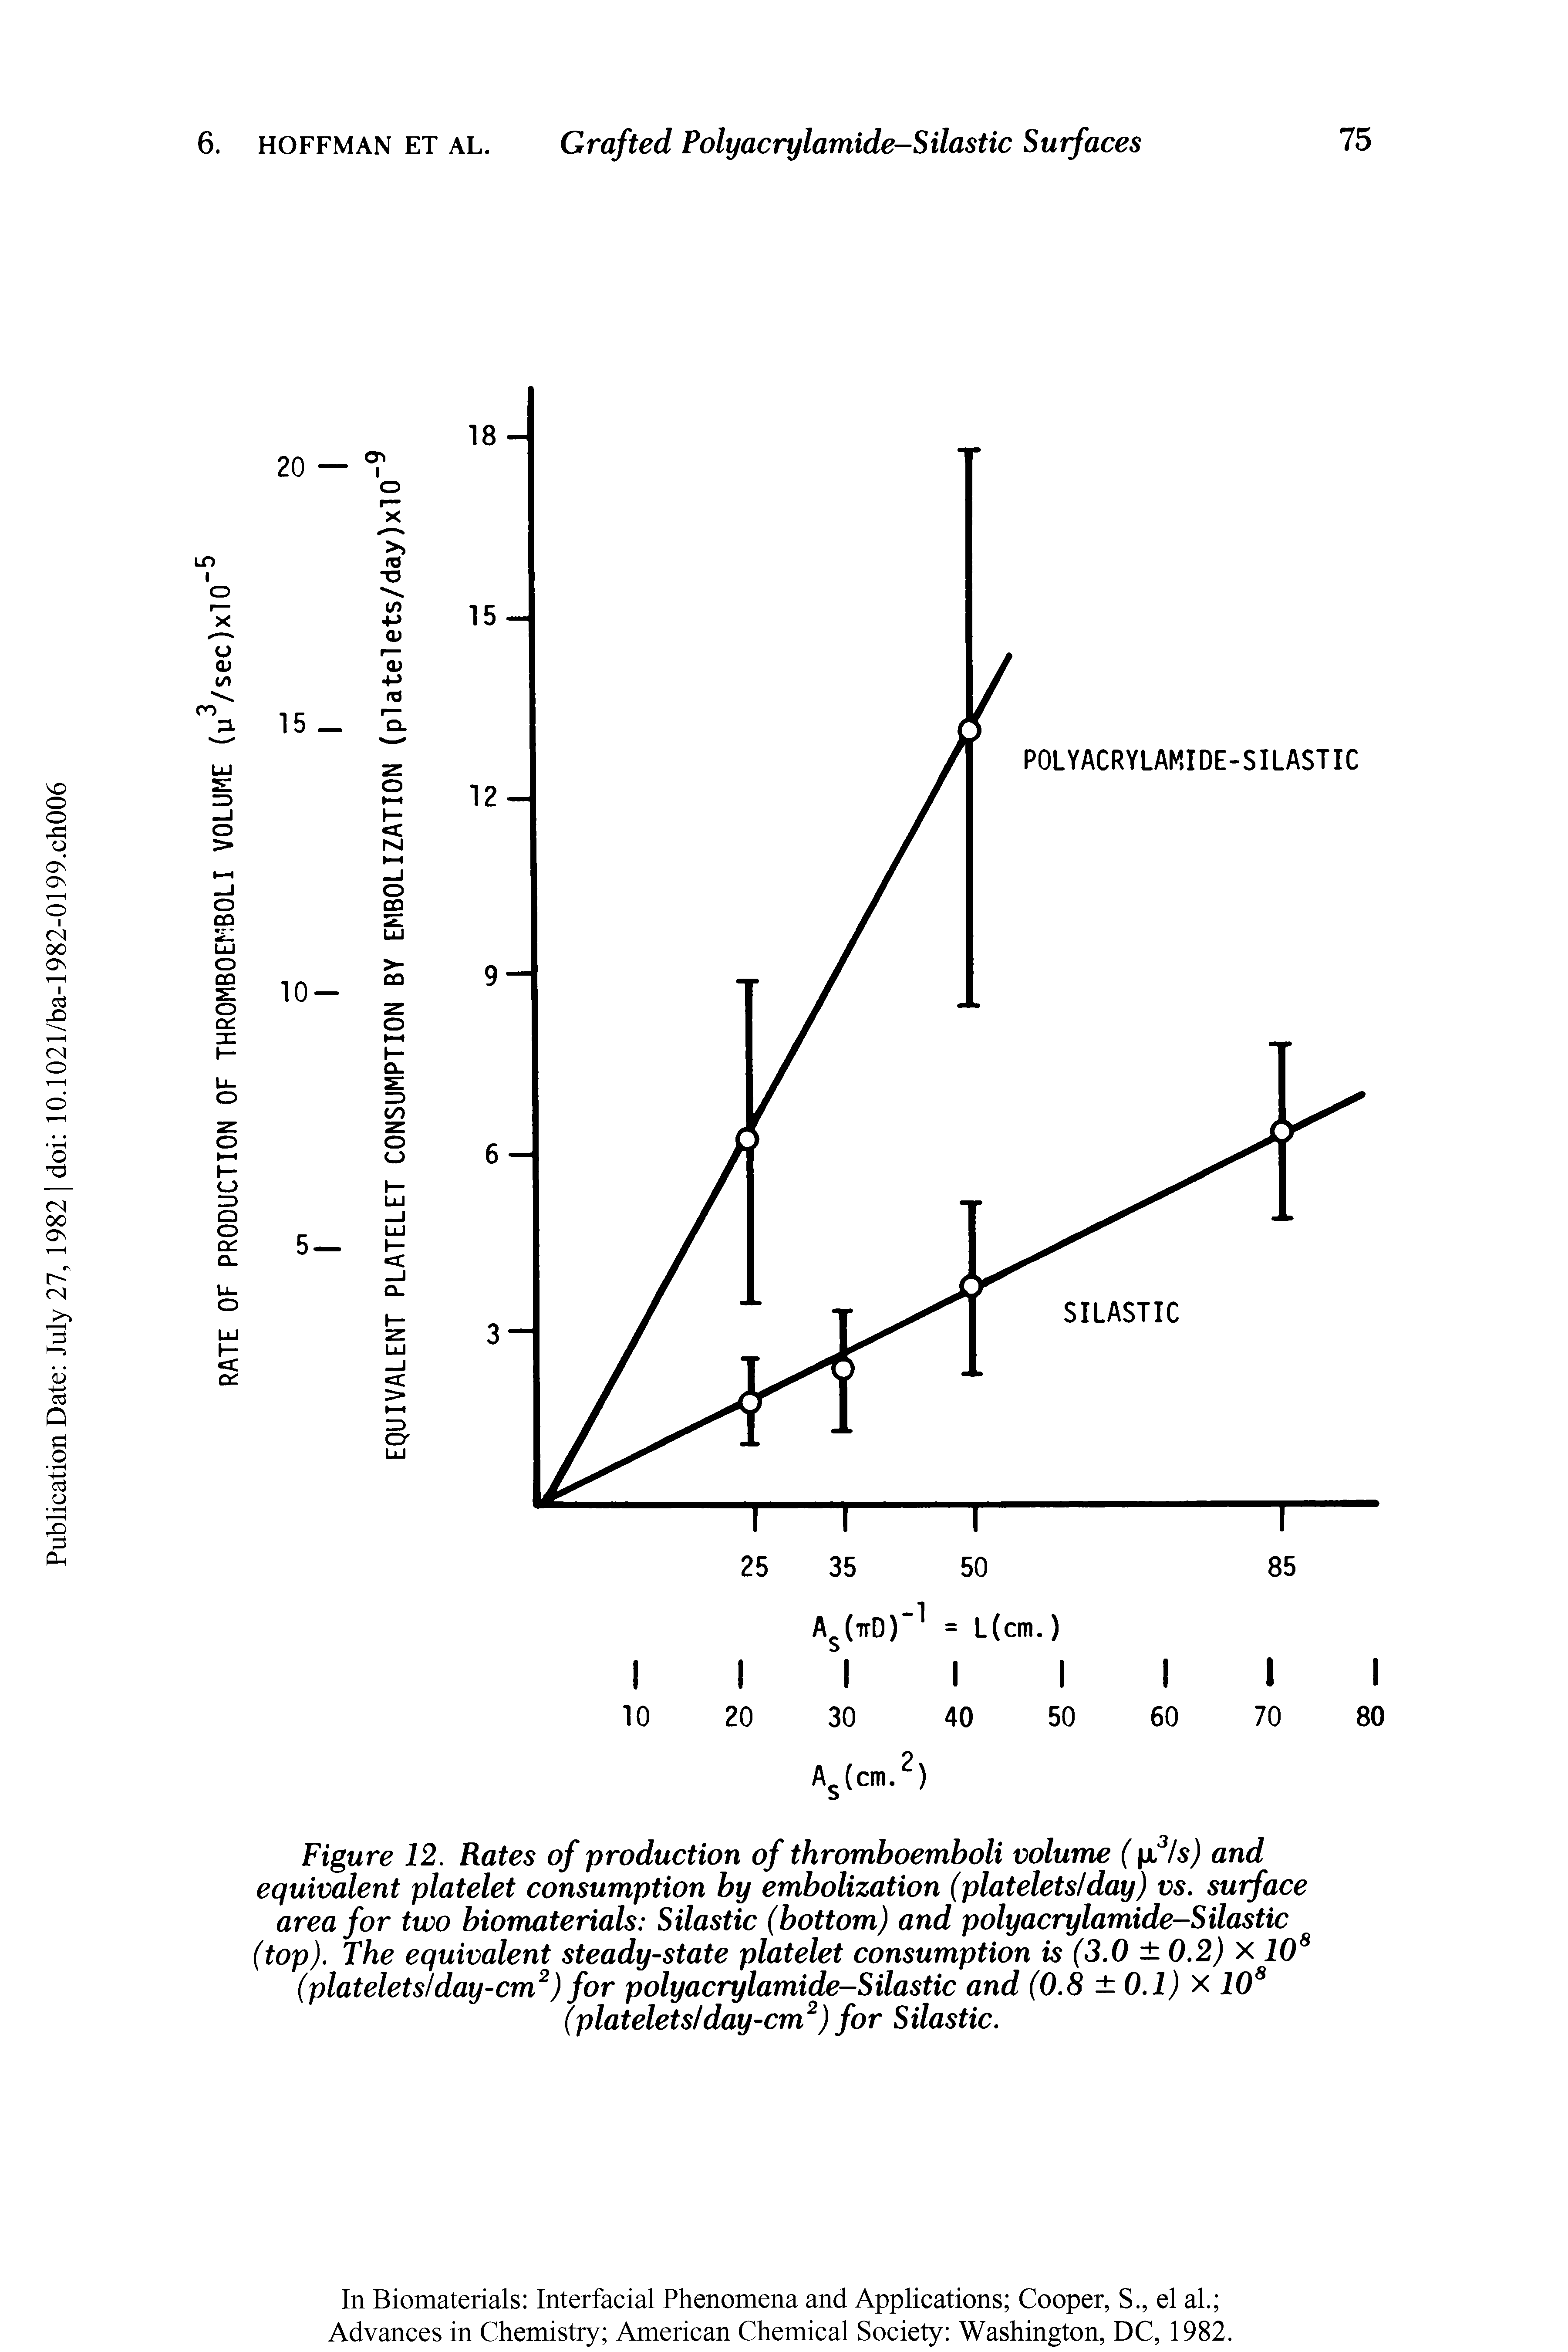 Figure 12. Rates of production of thromboemboli volume ( 3Is) and equivalent platelet consumption by embolization (platelets/day) vs. surface area for two biomaterials Silastic (bottom) and polyacrylamide-Silastic (top). The equivalent steady-state platelet consumption is (3.0 0.2) x 108 (platelets day-cm2) for polyacrylamide-Silastic and (0.8 0.1) X 108 (platelets day-cm2) for Silastic.